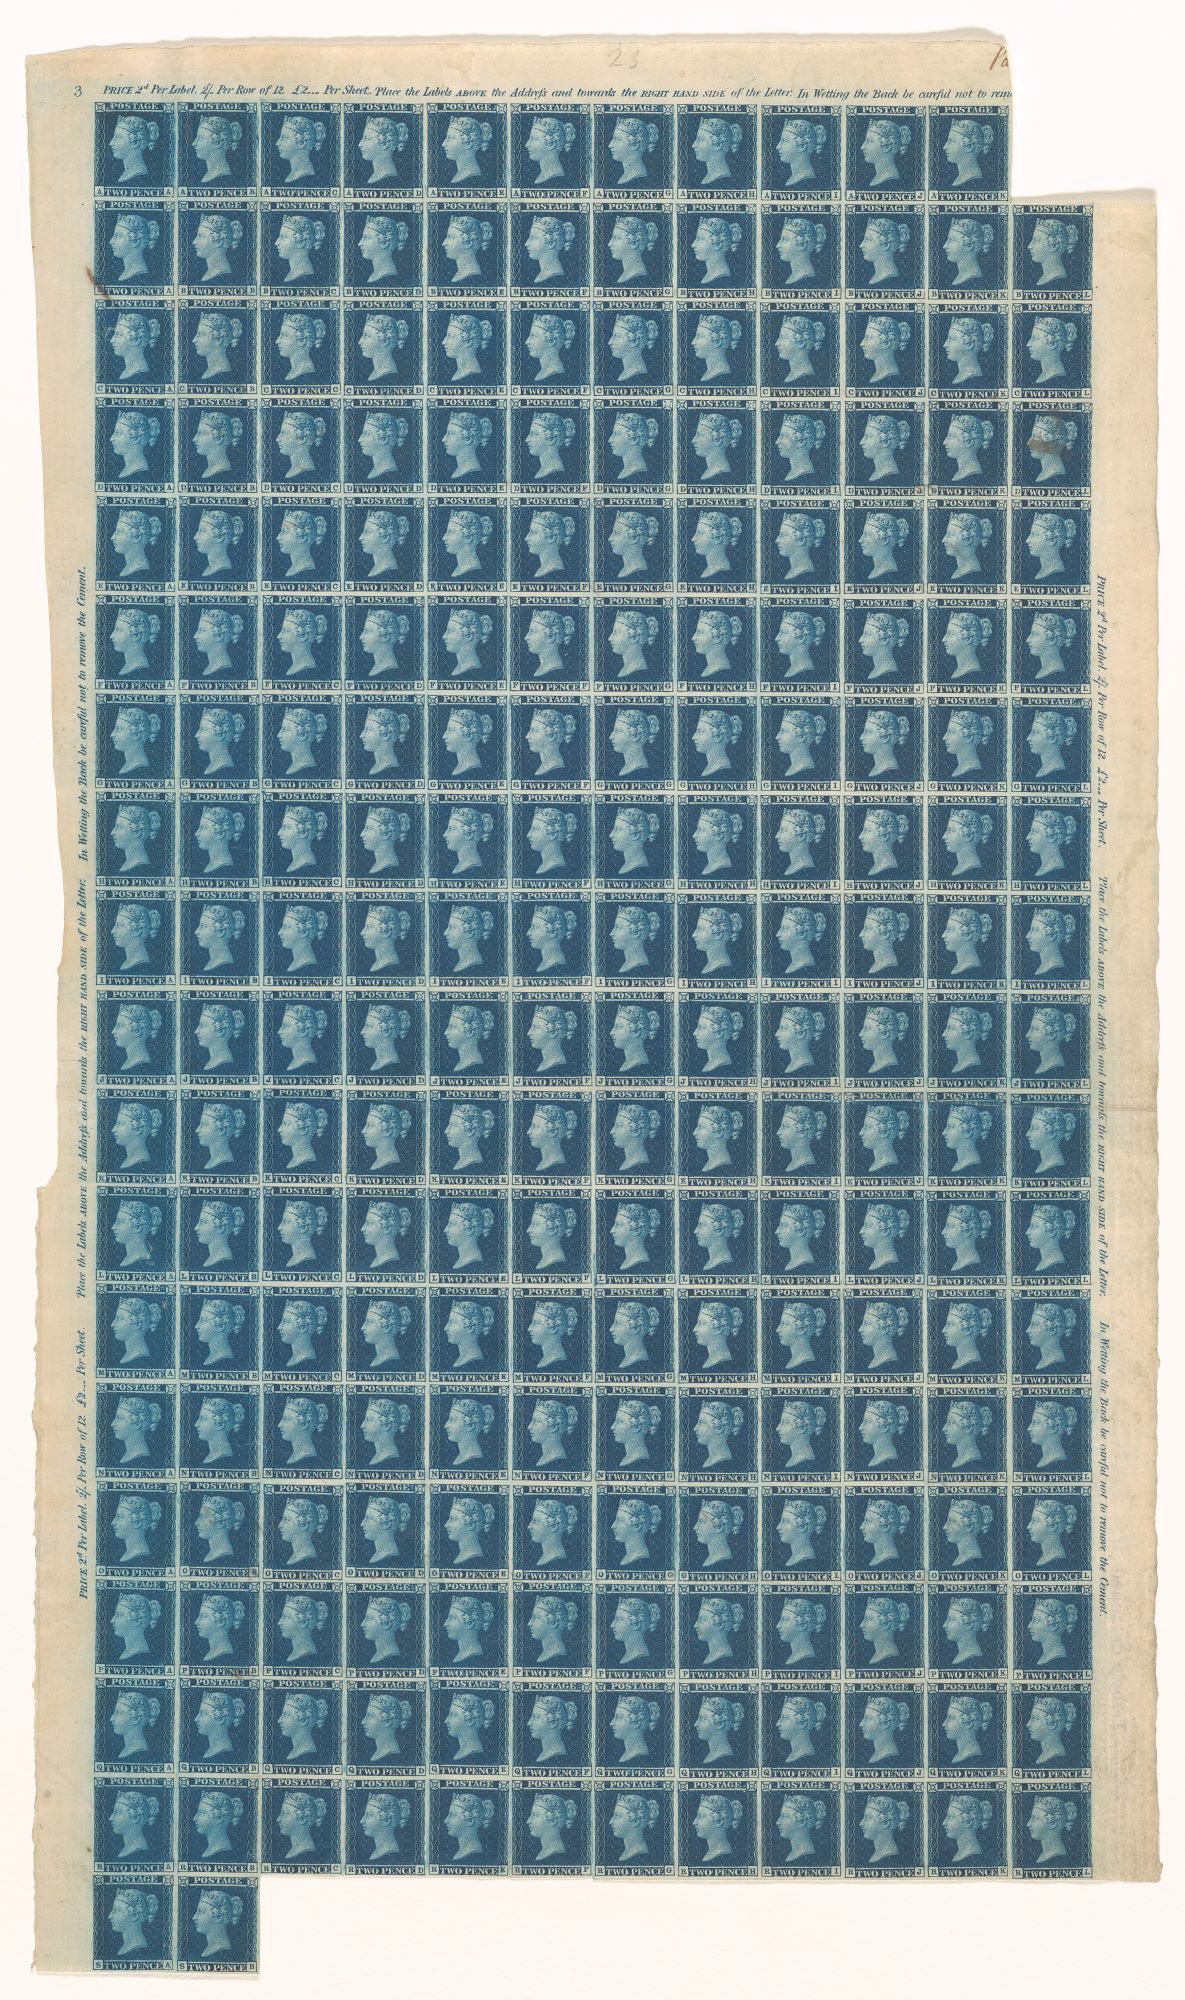 A large grid of repeating blue stamps, printed on cream paper.